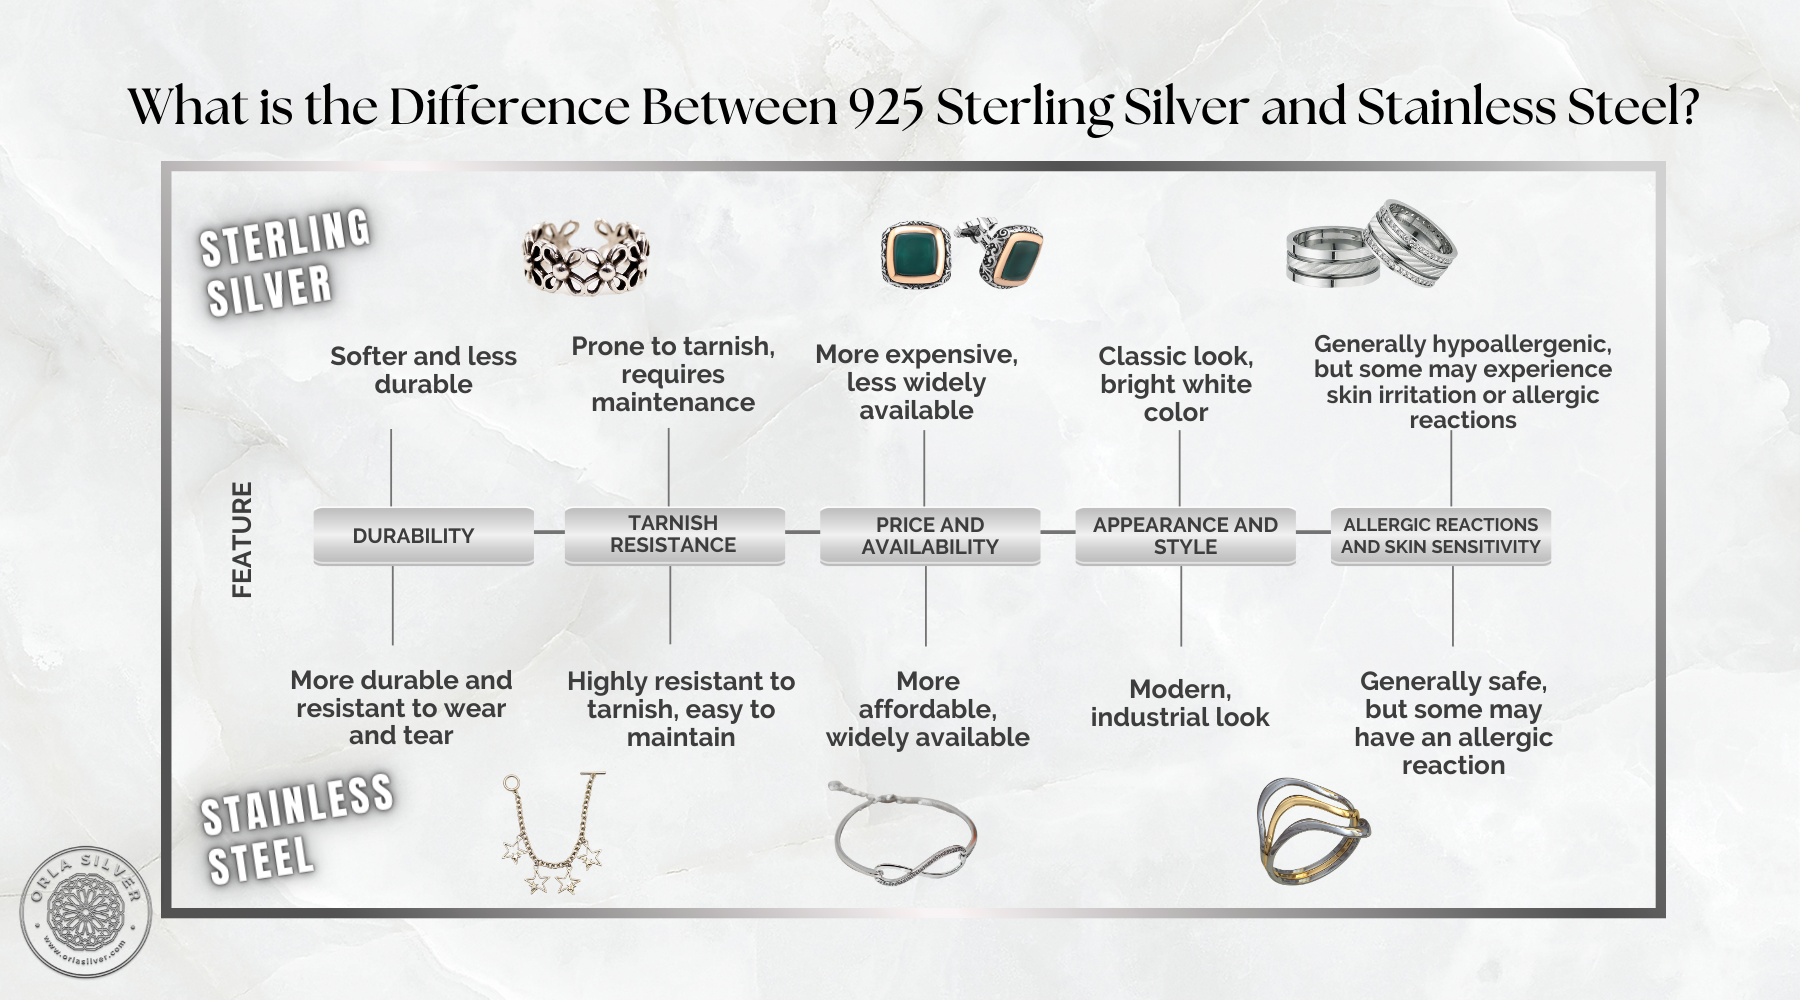 What is the Difference Between 925 Sterling Silver and Stainless Steel? 925 Sterling Silver vs. Stainless Steel image